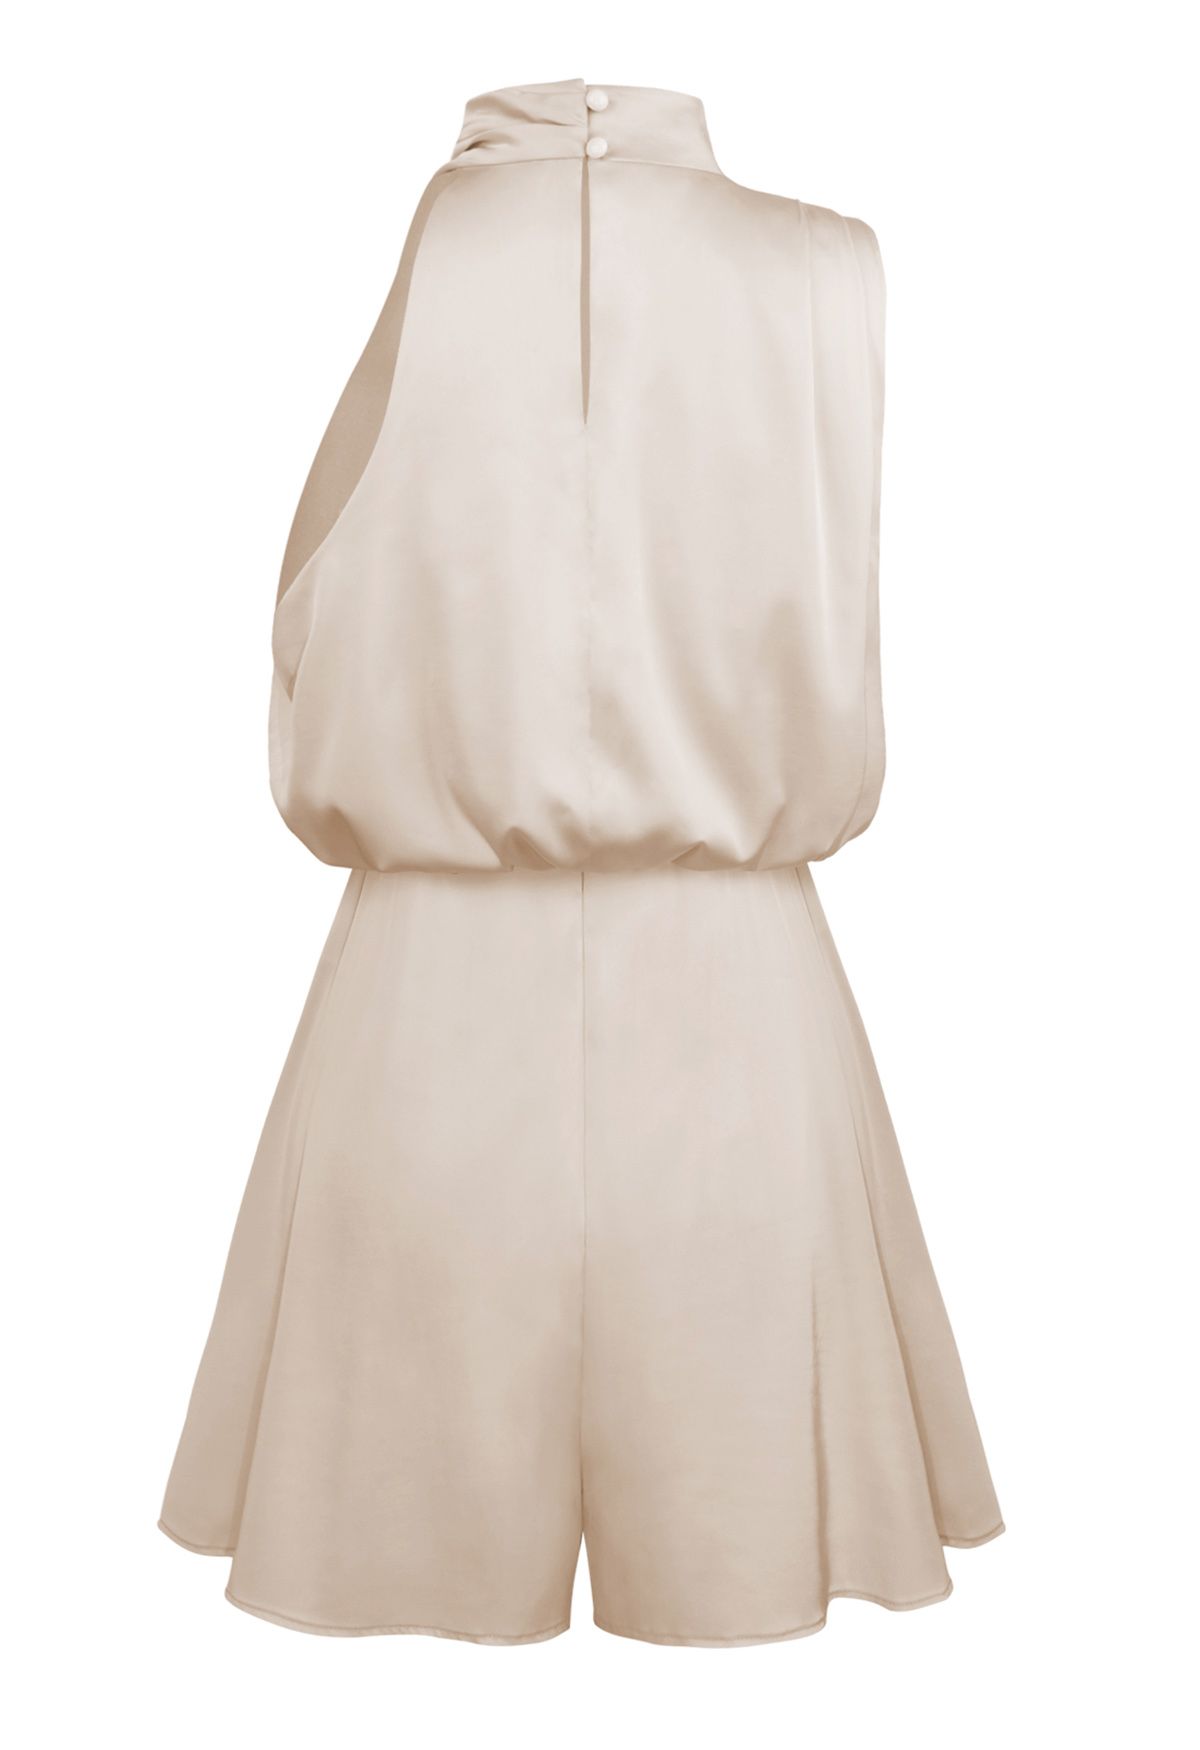 Satin Asymmetric Ruched Neckline Sleeveless Playsuit in Apricot - Retro ...